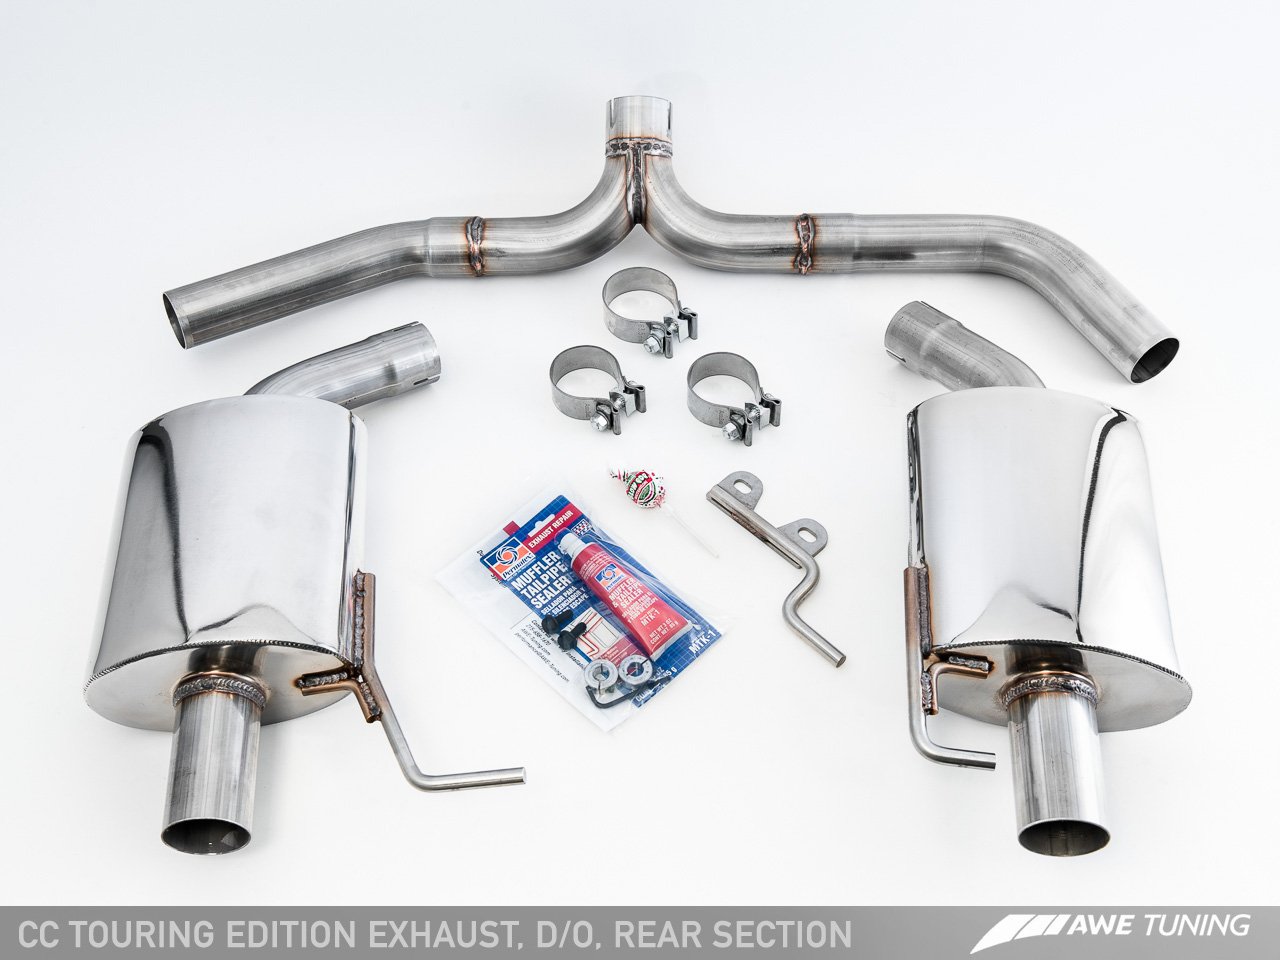 Touring Edition Exhaust for VW CC 2.0T - Dual Outlet - Diamond Black Tips